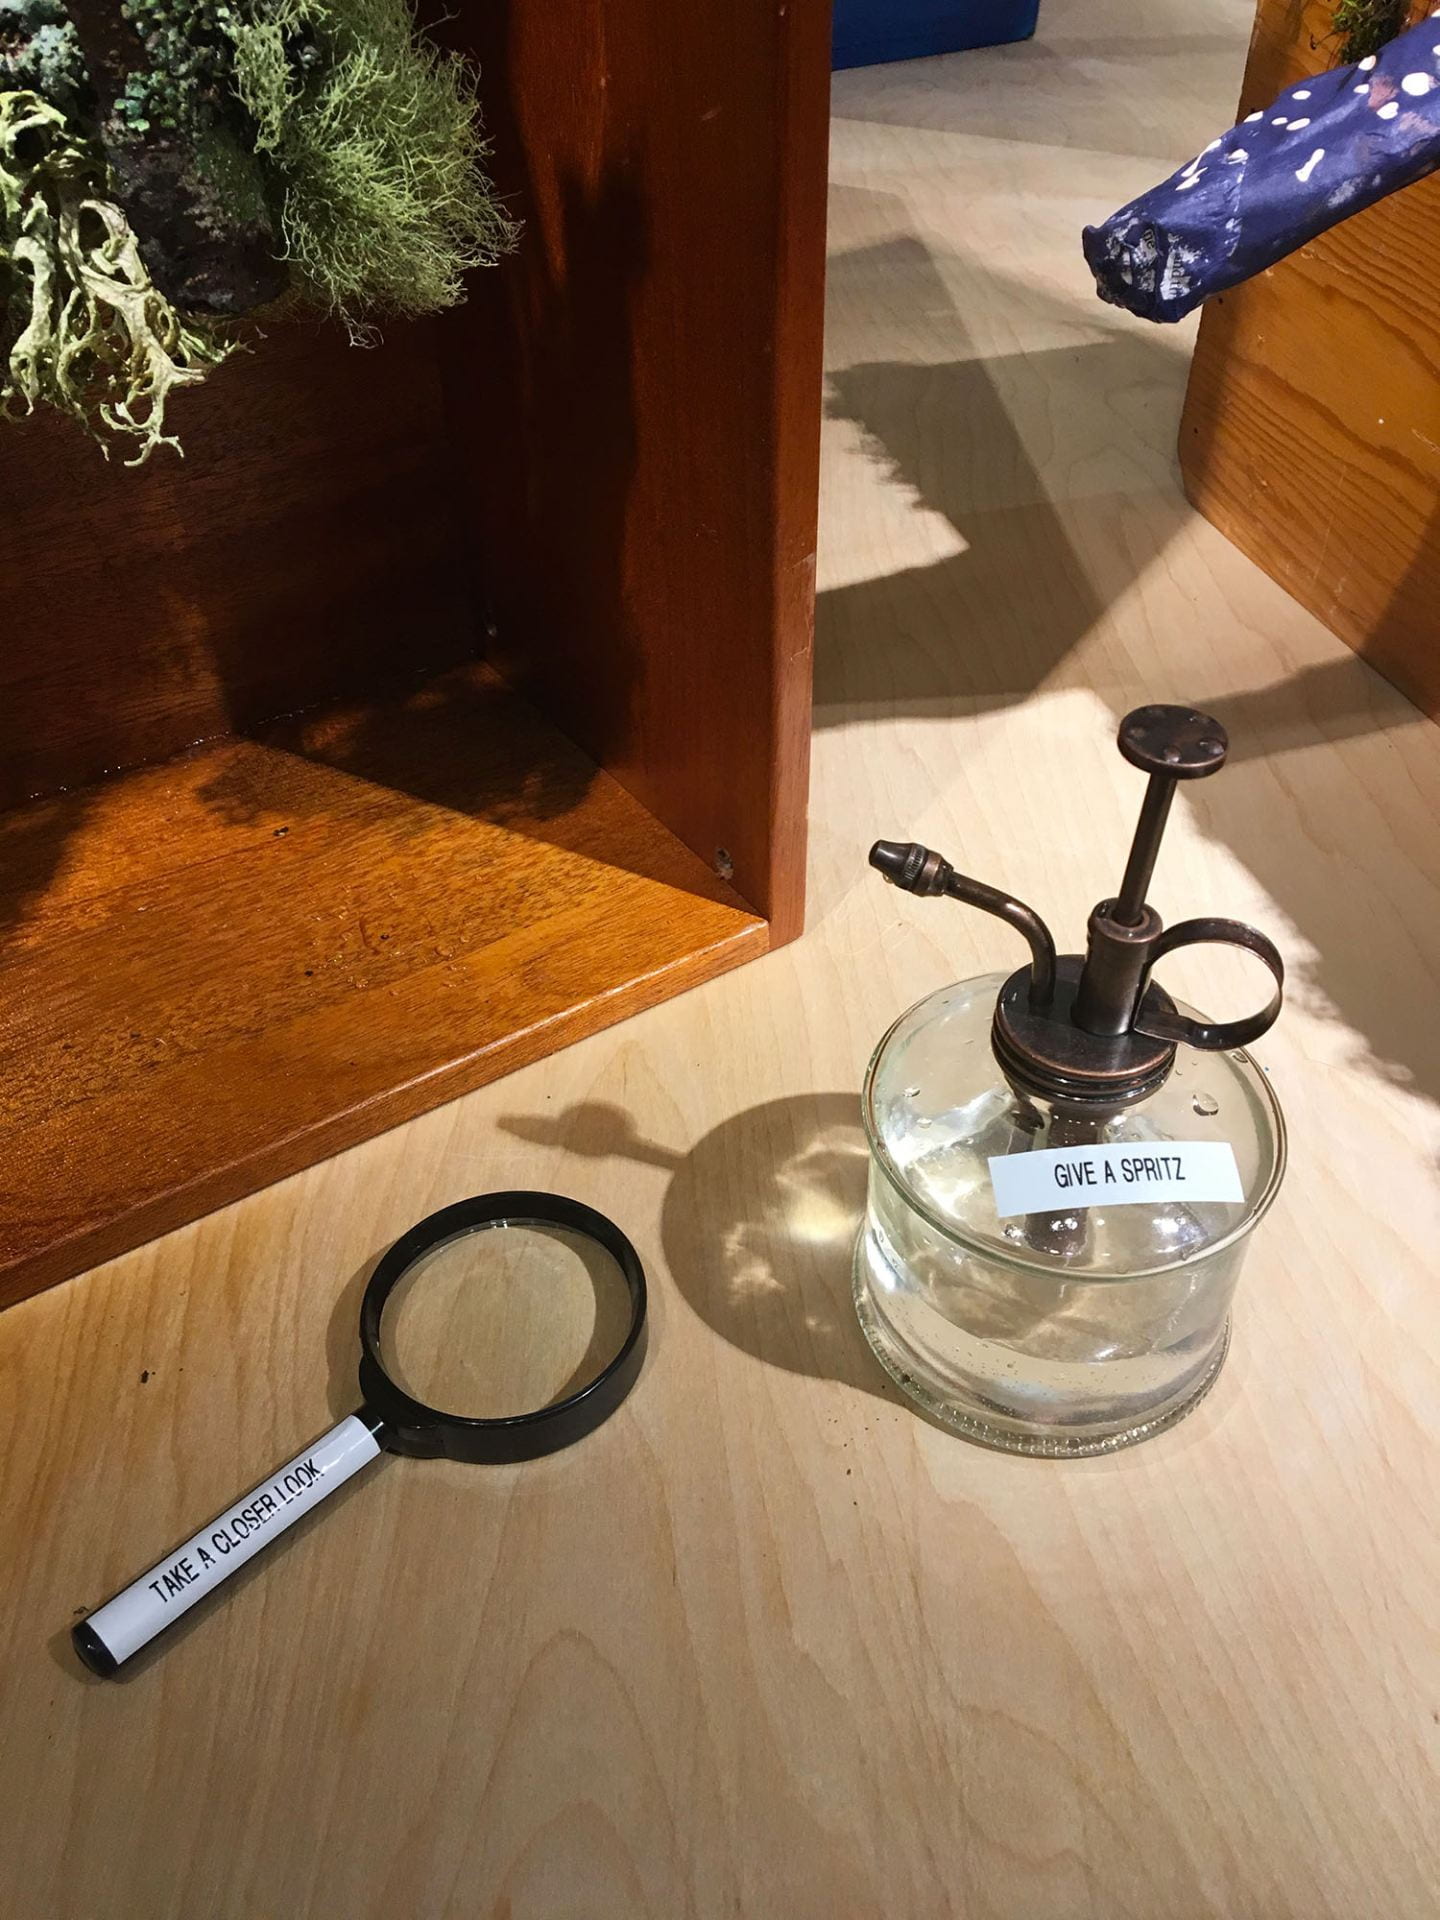 spray bottle labeled "give a spritz" and a magnifying glass labeled "Take a closer look"